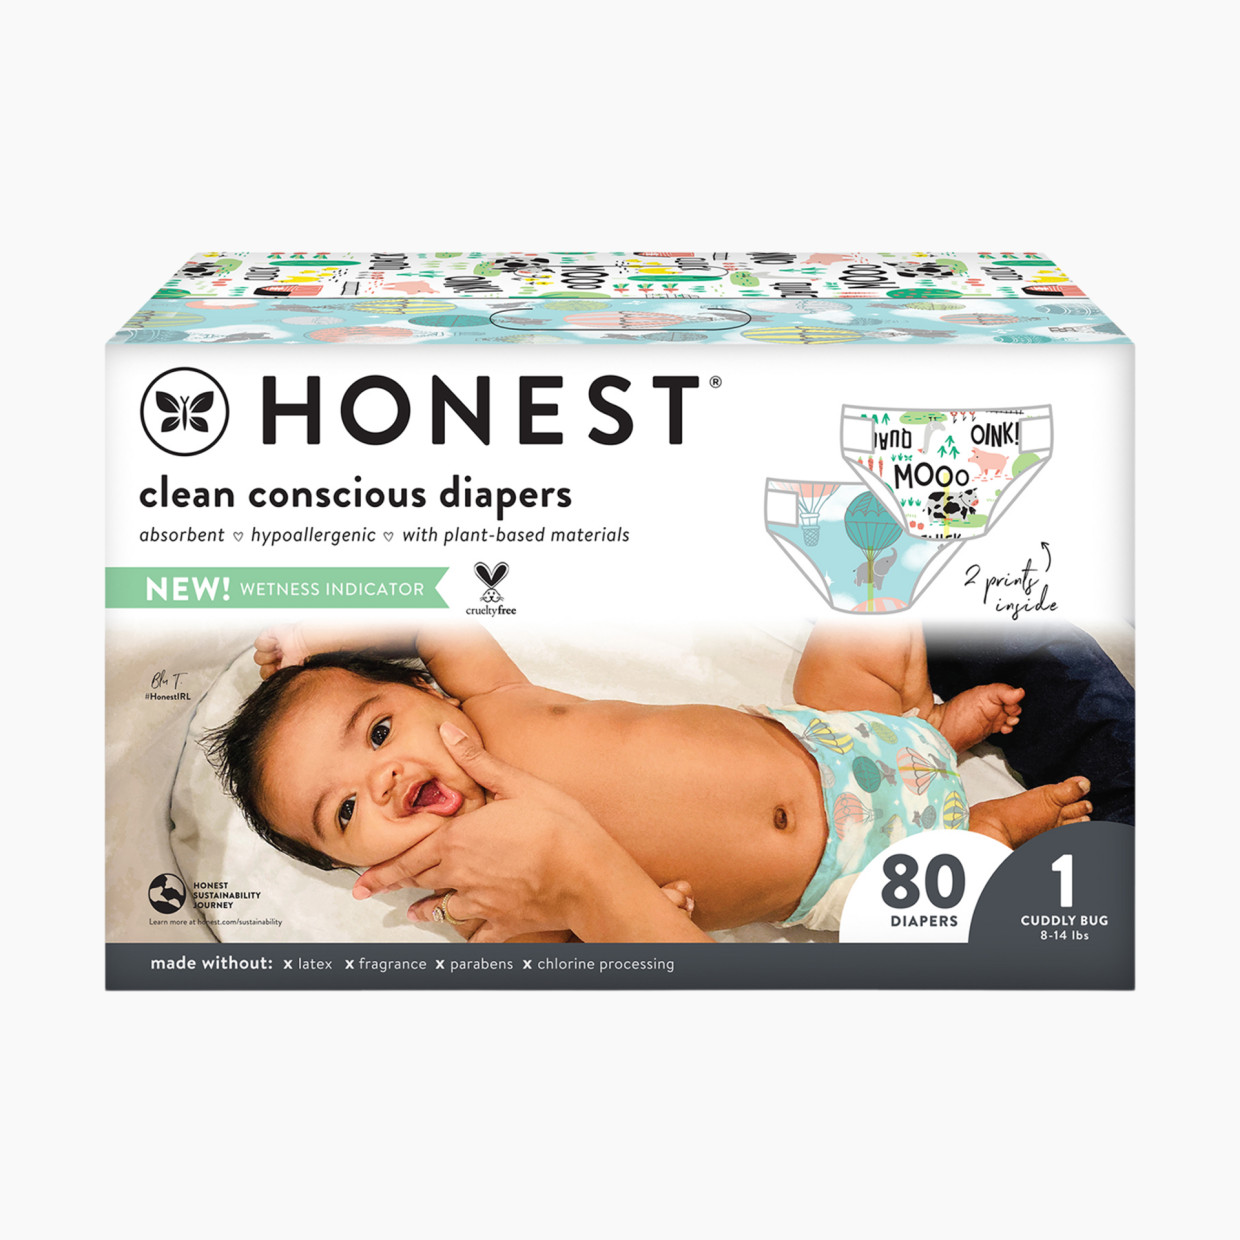 The Honest Company Club Box Diapers - Above It All + Barnyard Babies, Size 1, 80 Count.